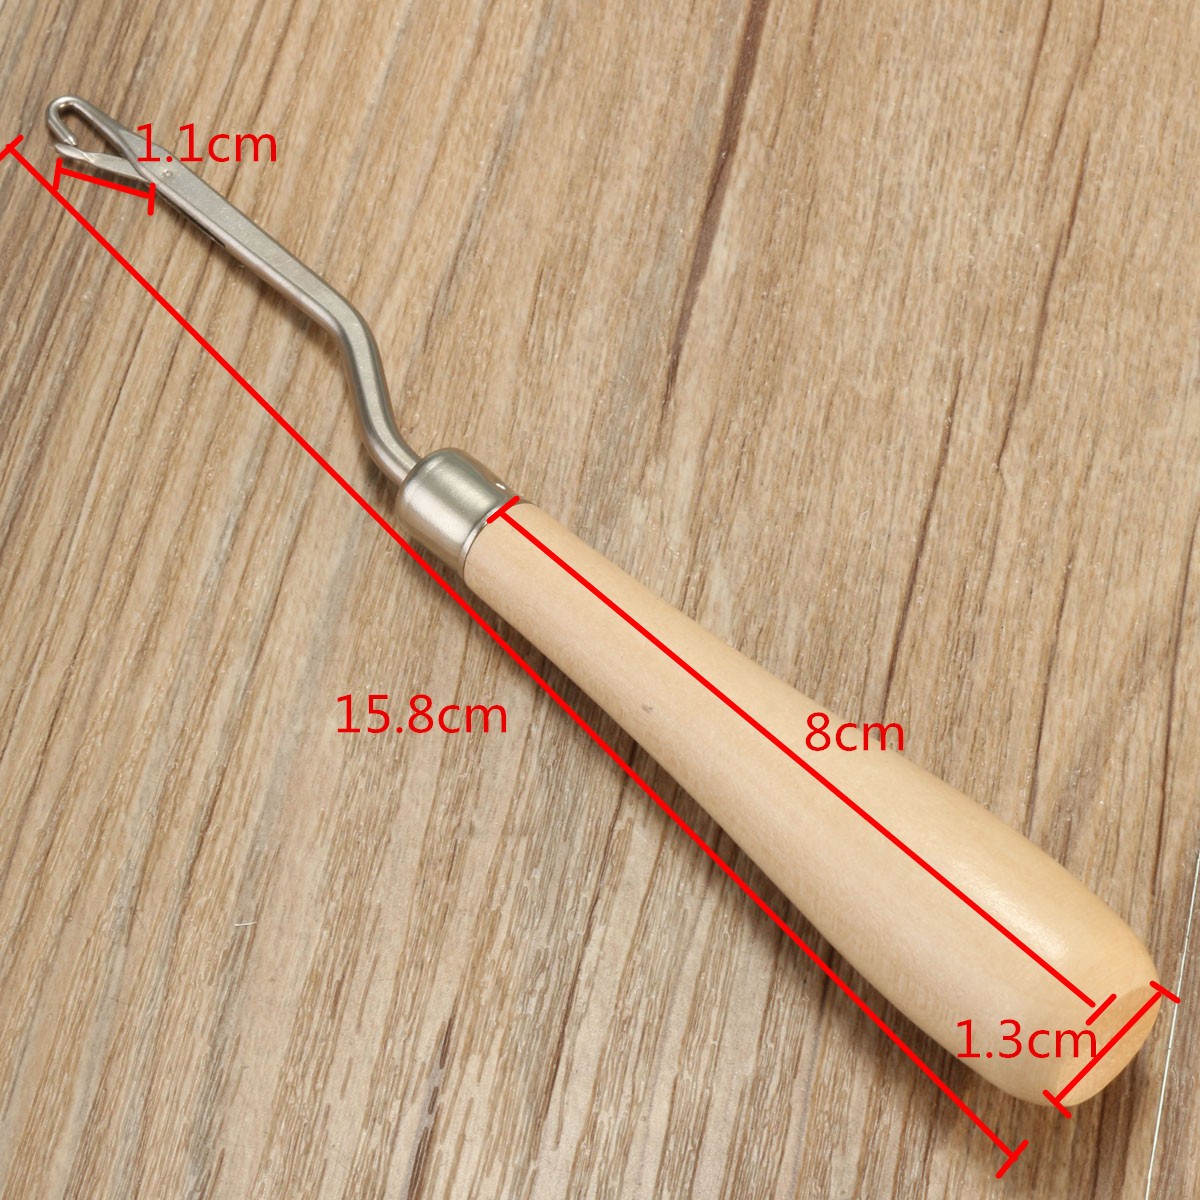 Wooden-Handle-Crochet-Needle-Latch-Hook-Puller-Tool-For-Canvas-Rug-Mats-Making-1041374-5